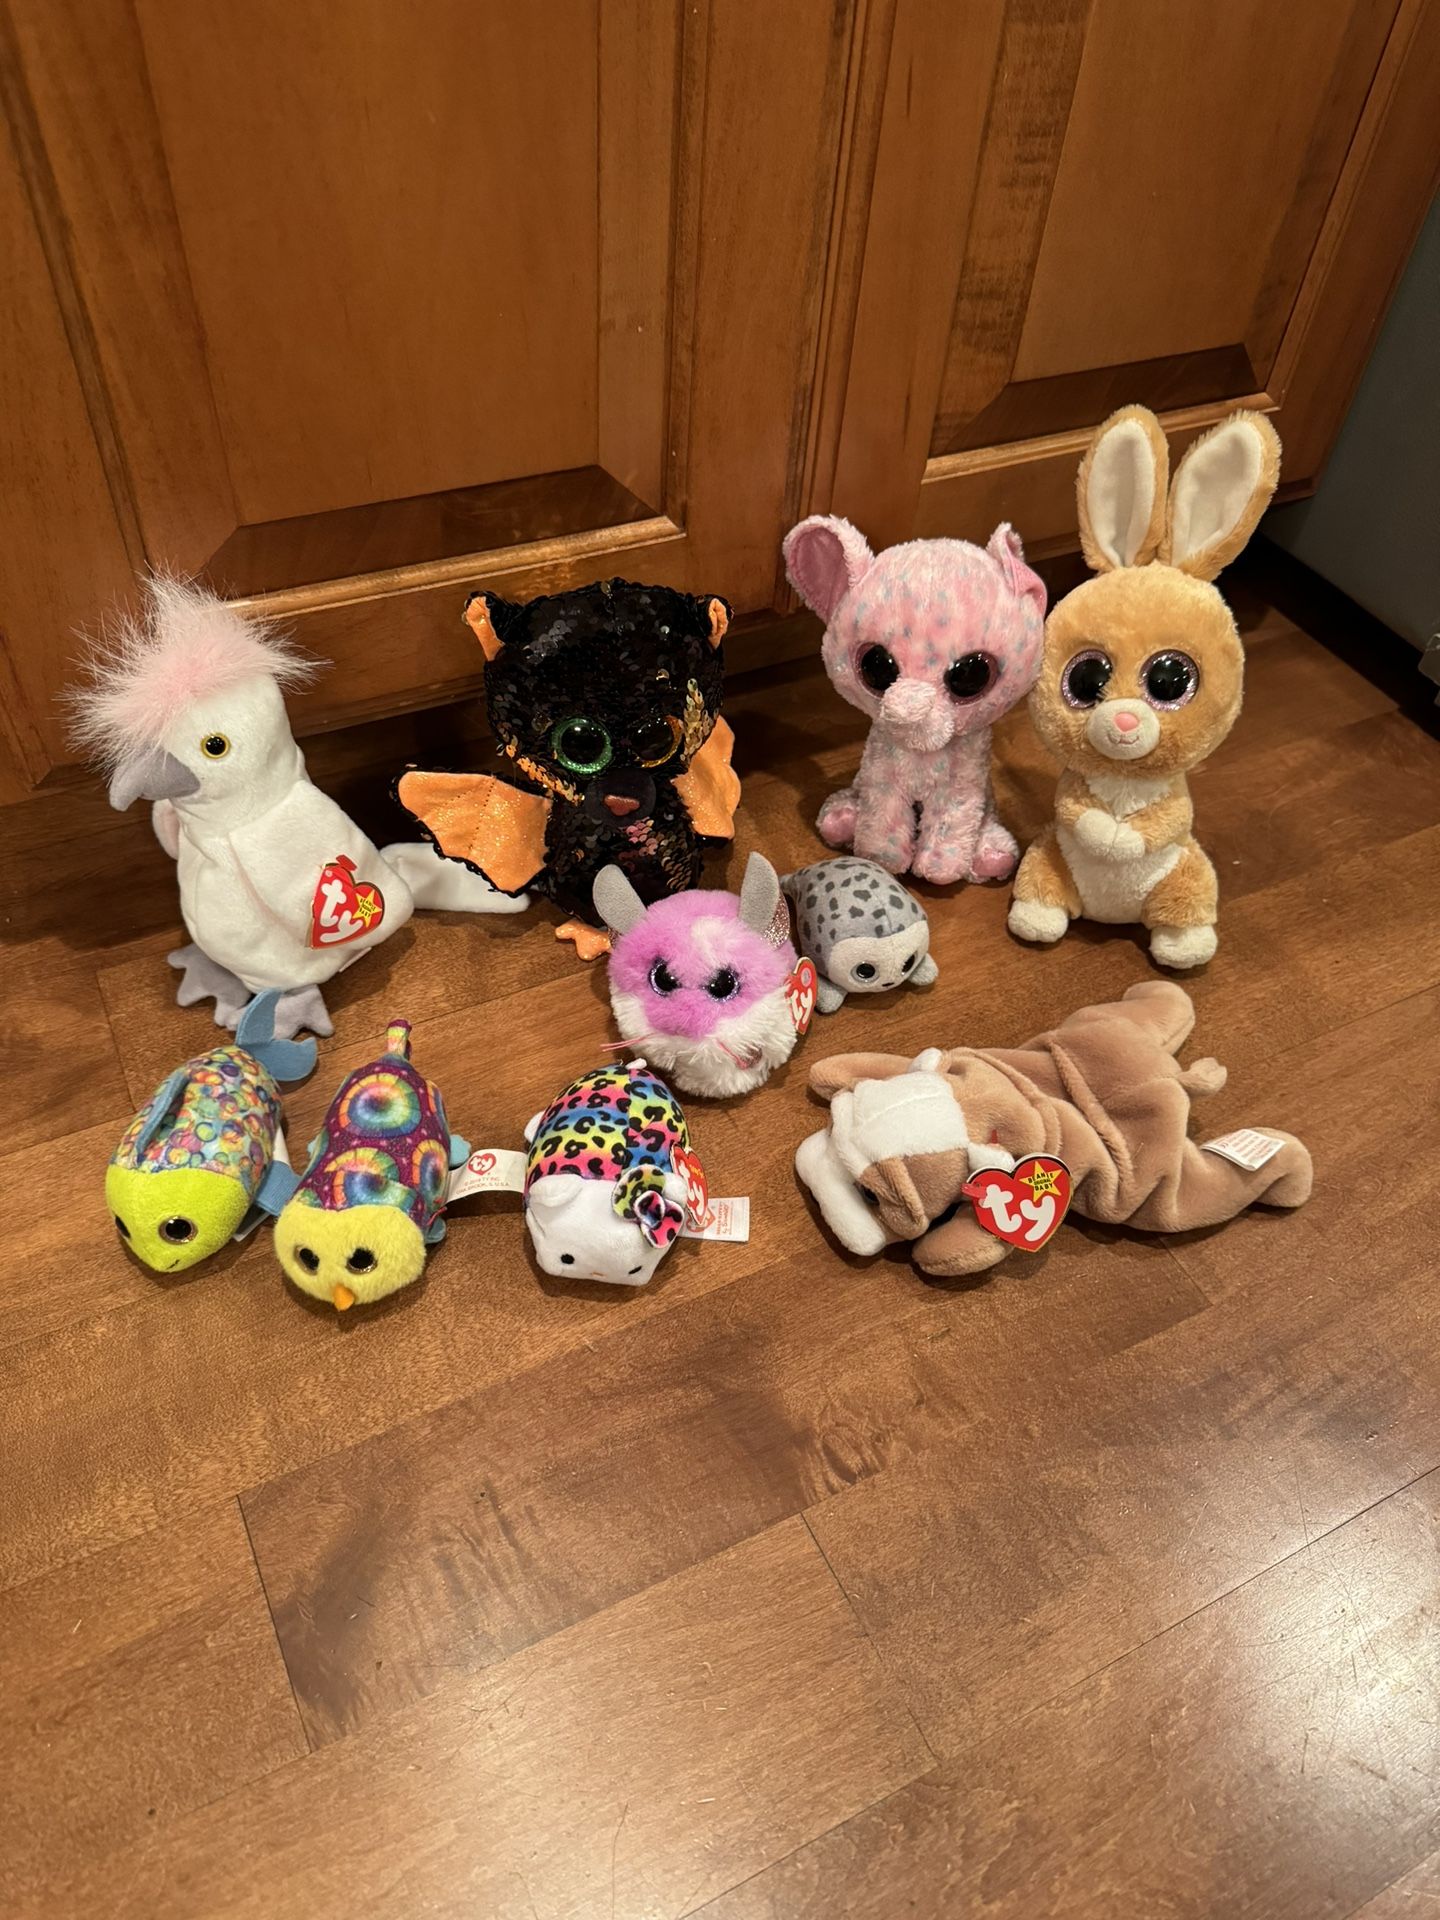 Huge Beanie Baby Stuffed Animal Bundle Shipping Available 